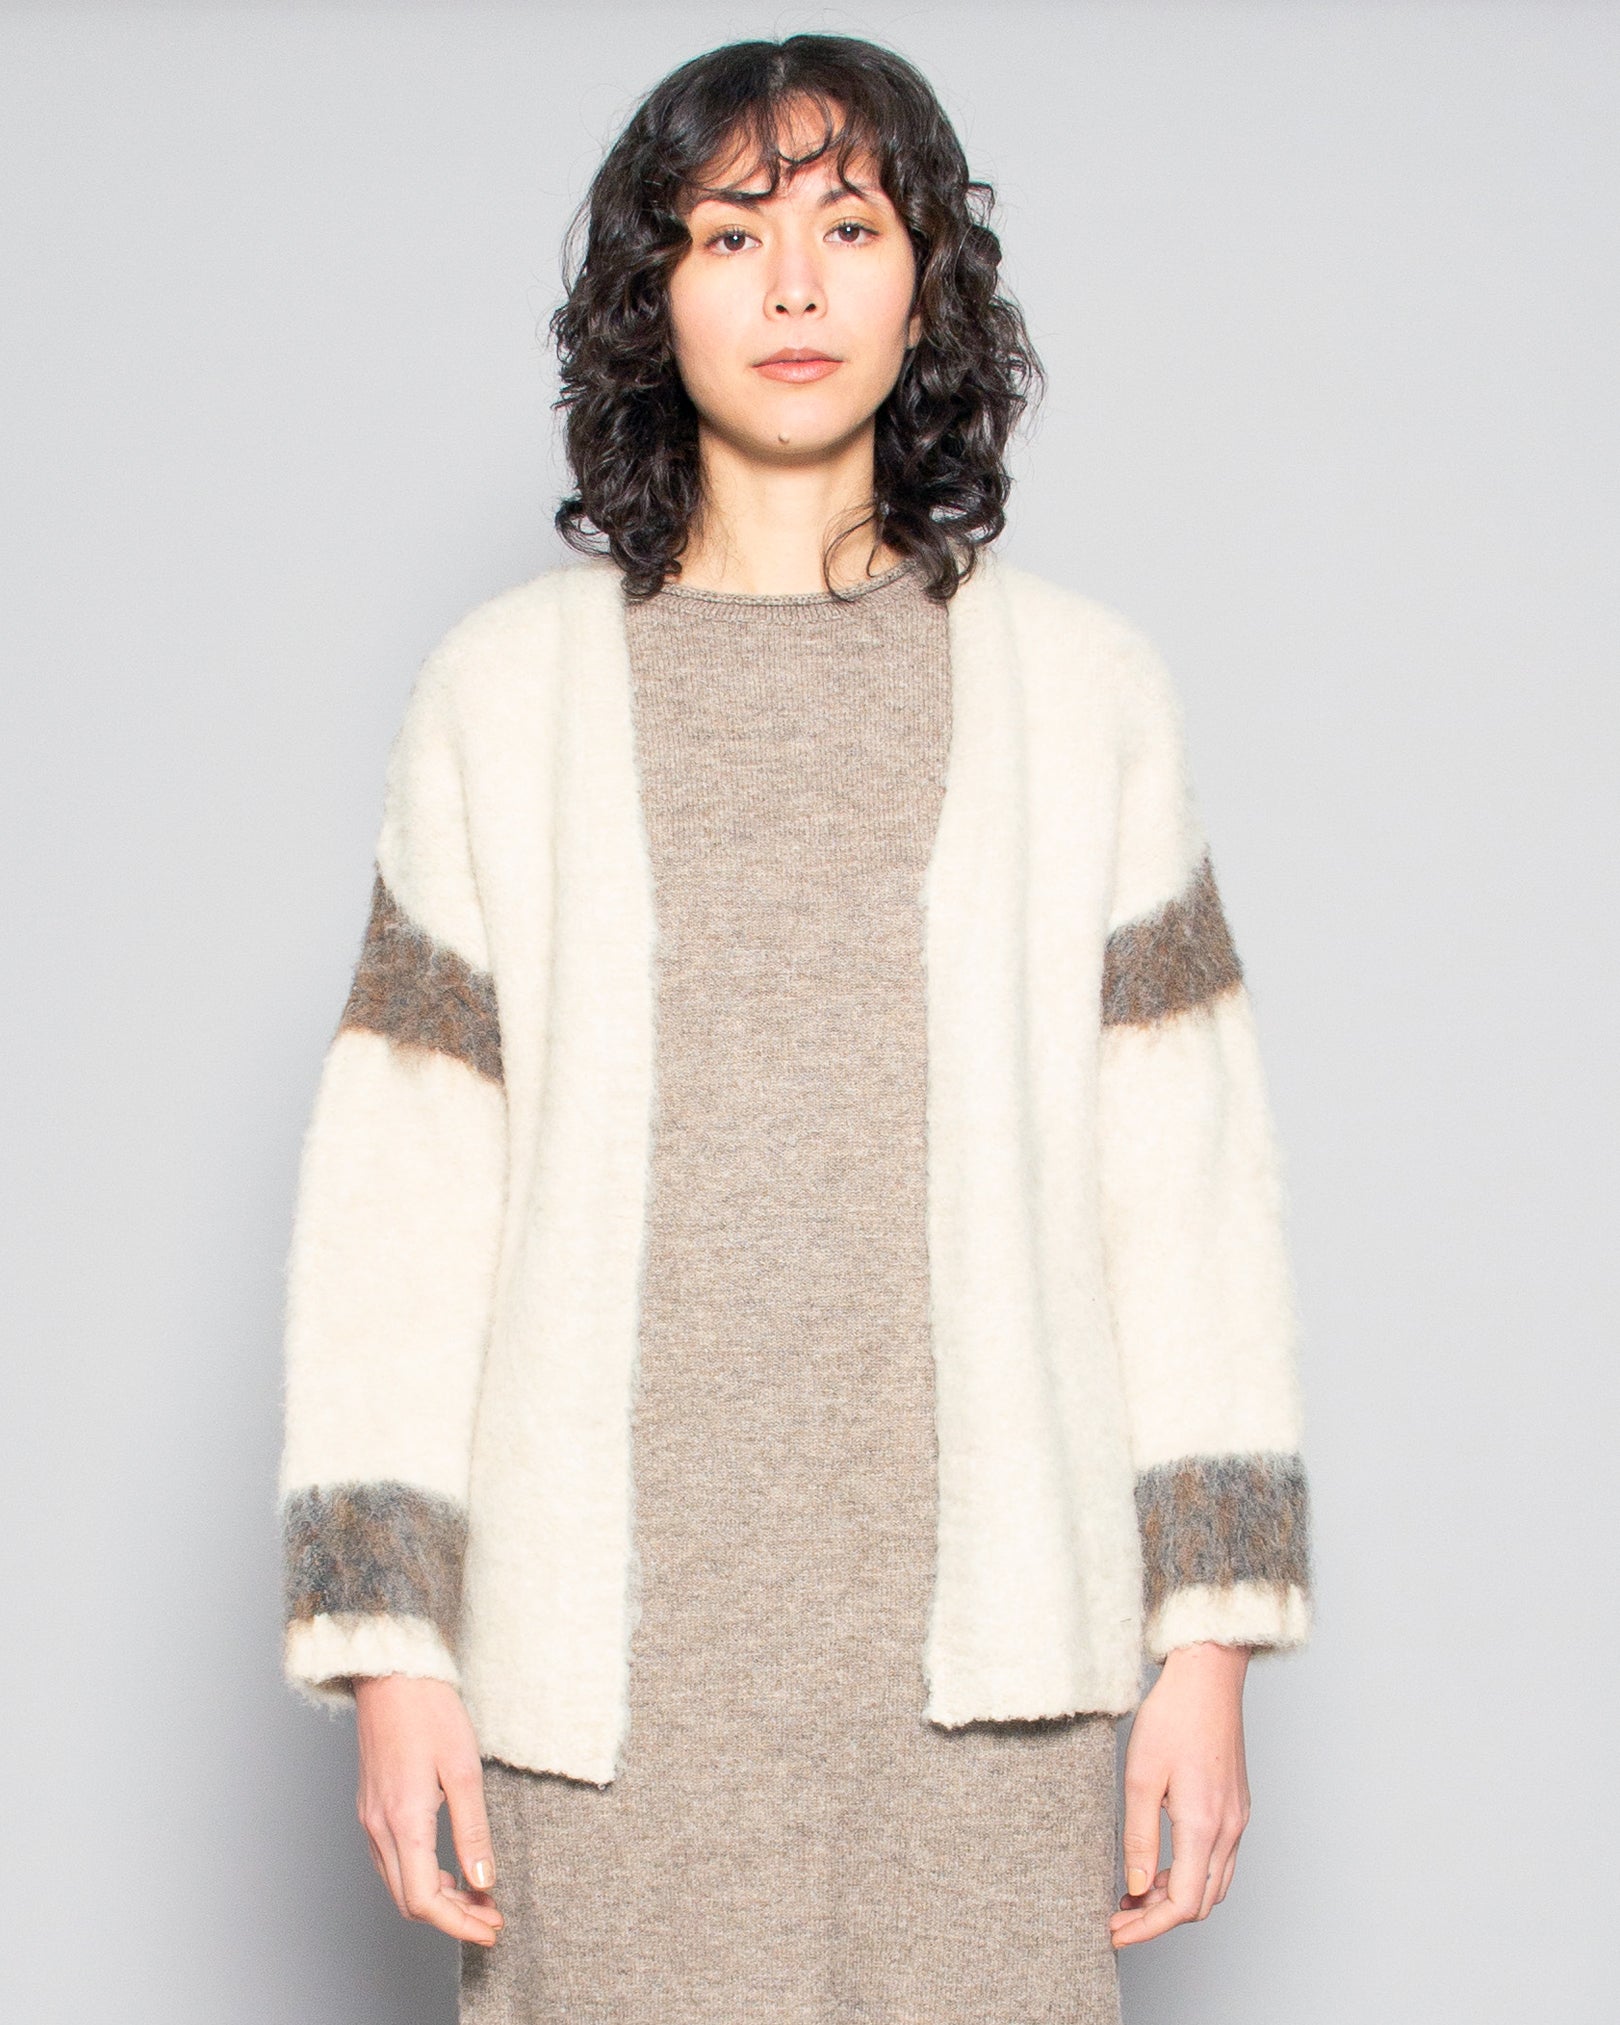 PERSONS Roan Felted Wool Blend Cardi in Ecru Multi available at Lahn.shop